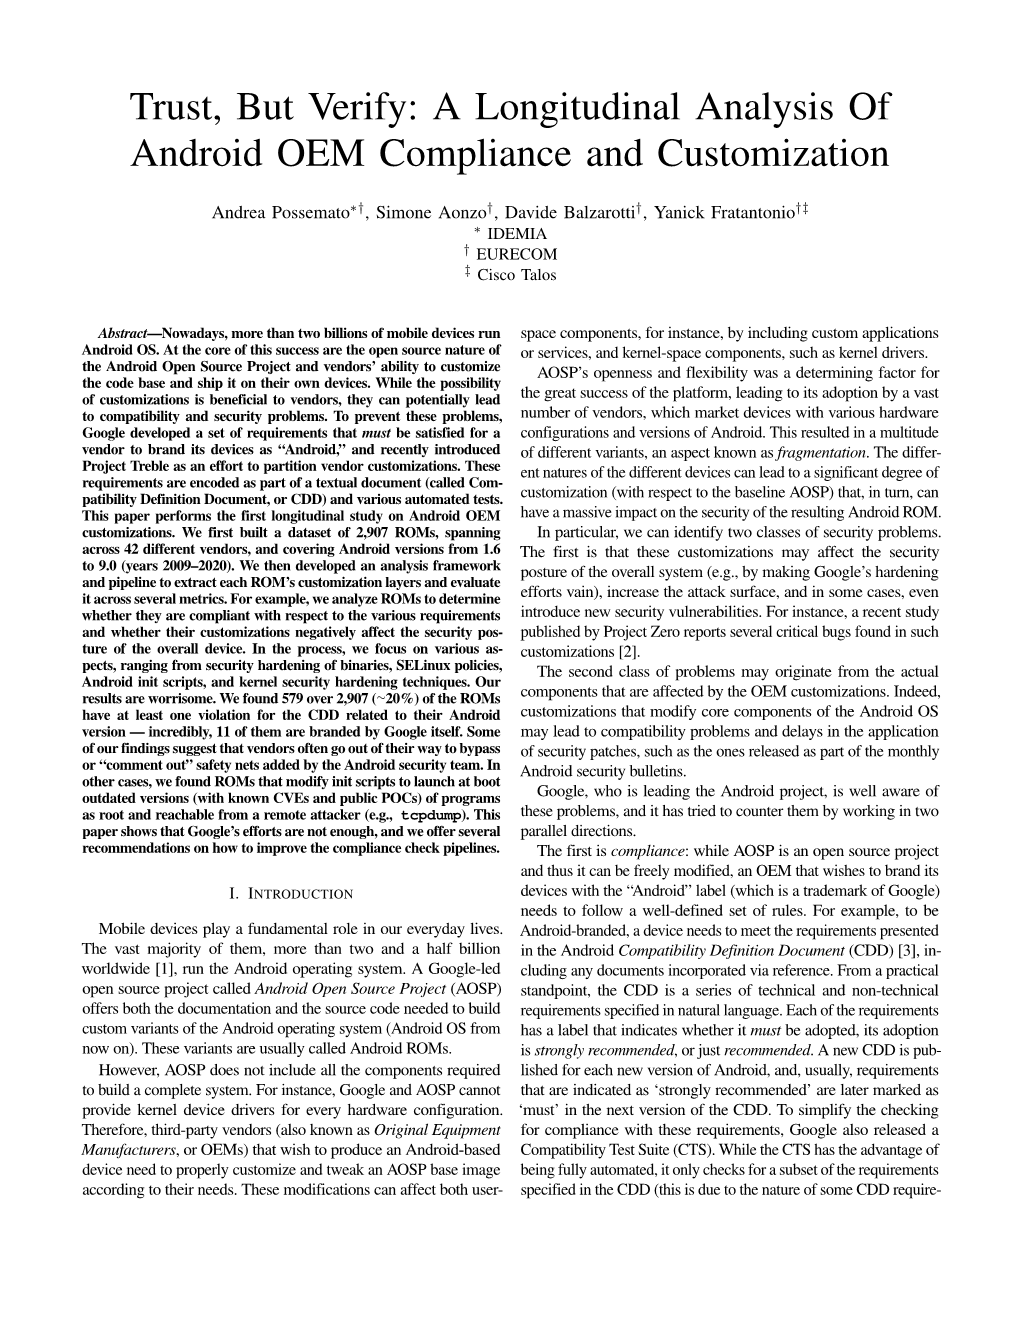 A Longitudinal Analysis of Android OEM Compliance and Customization